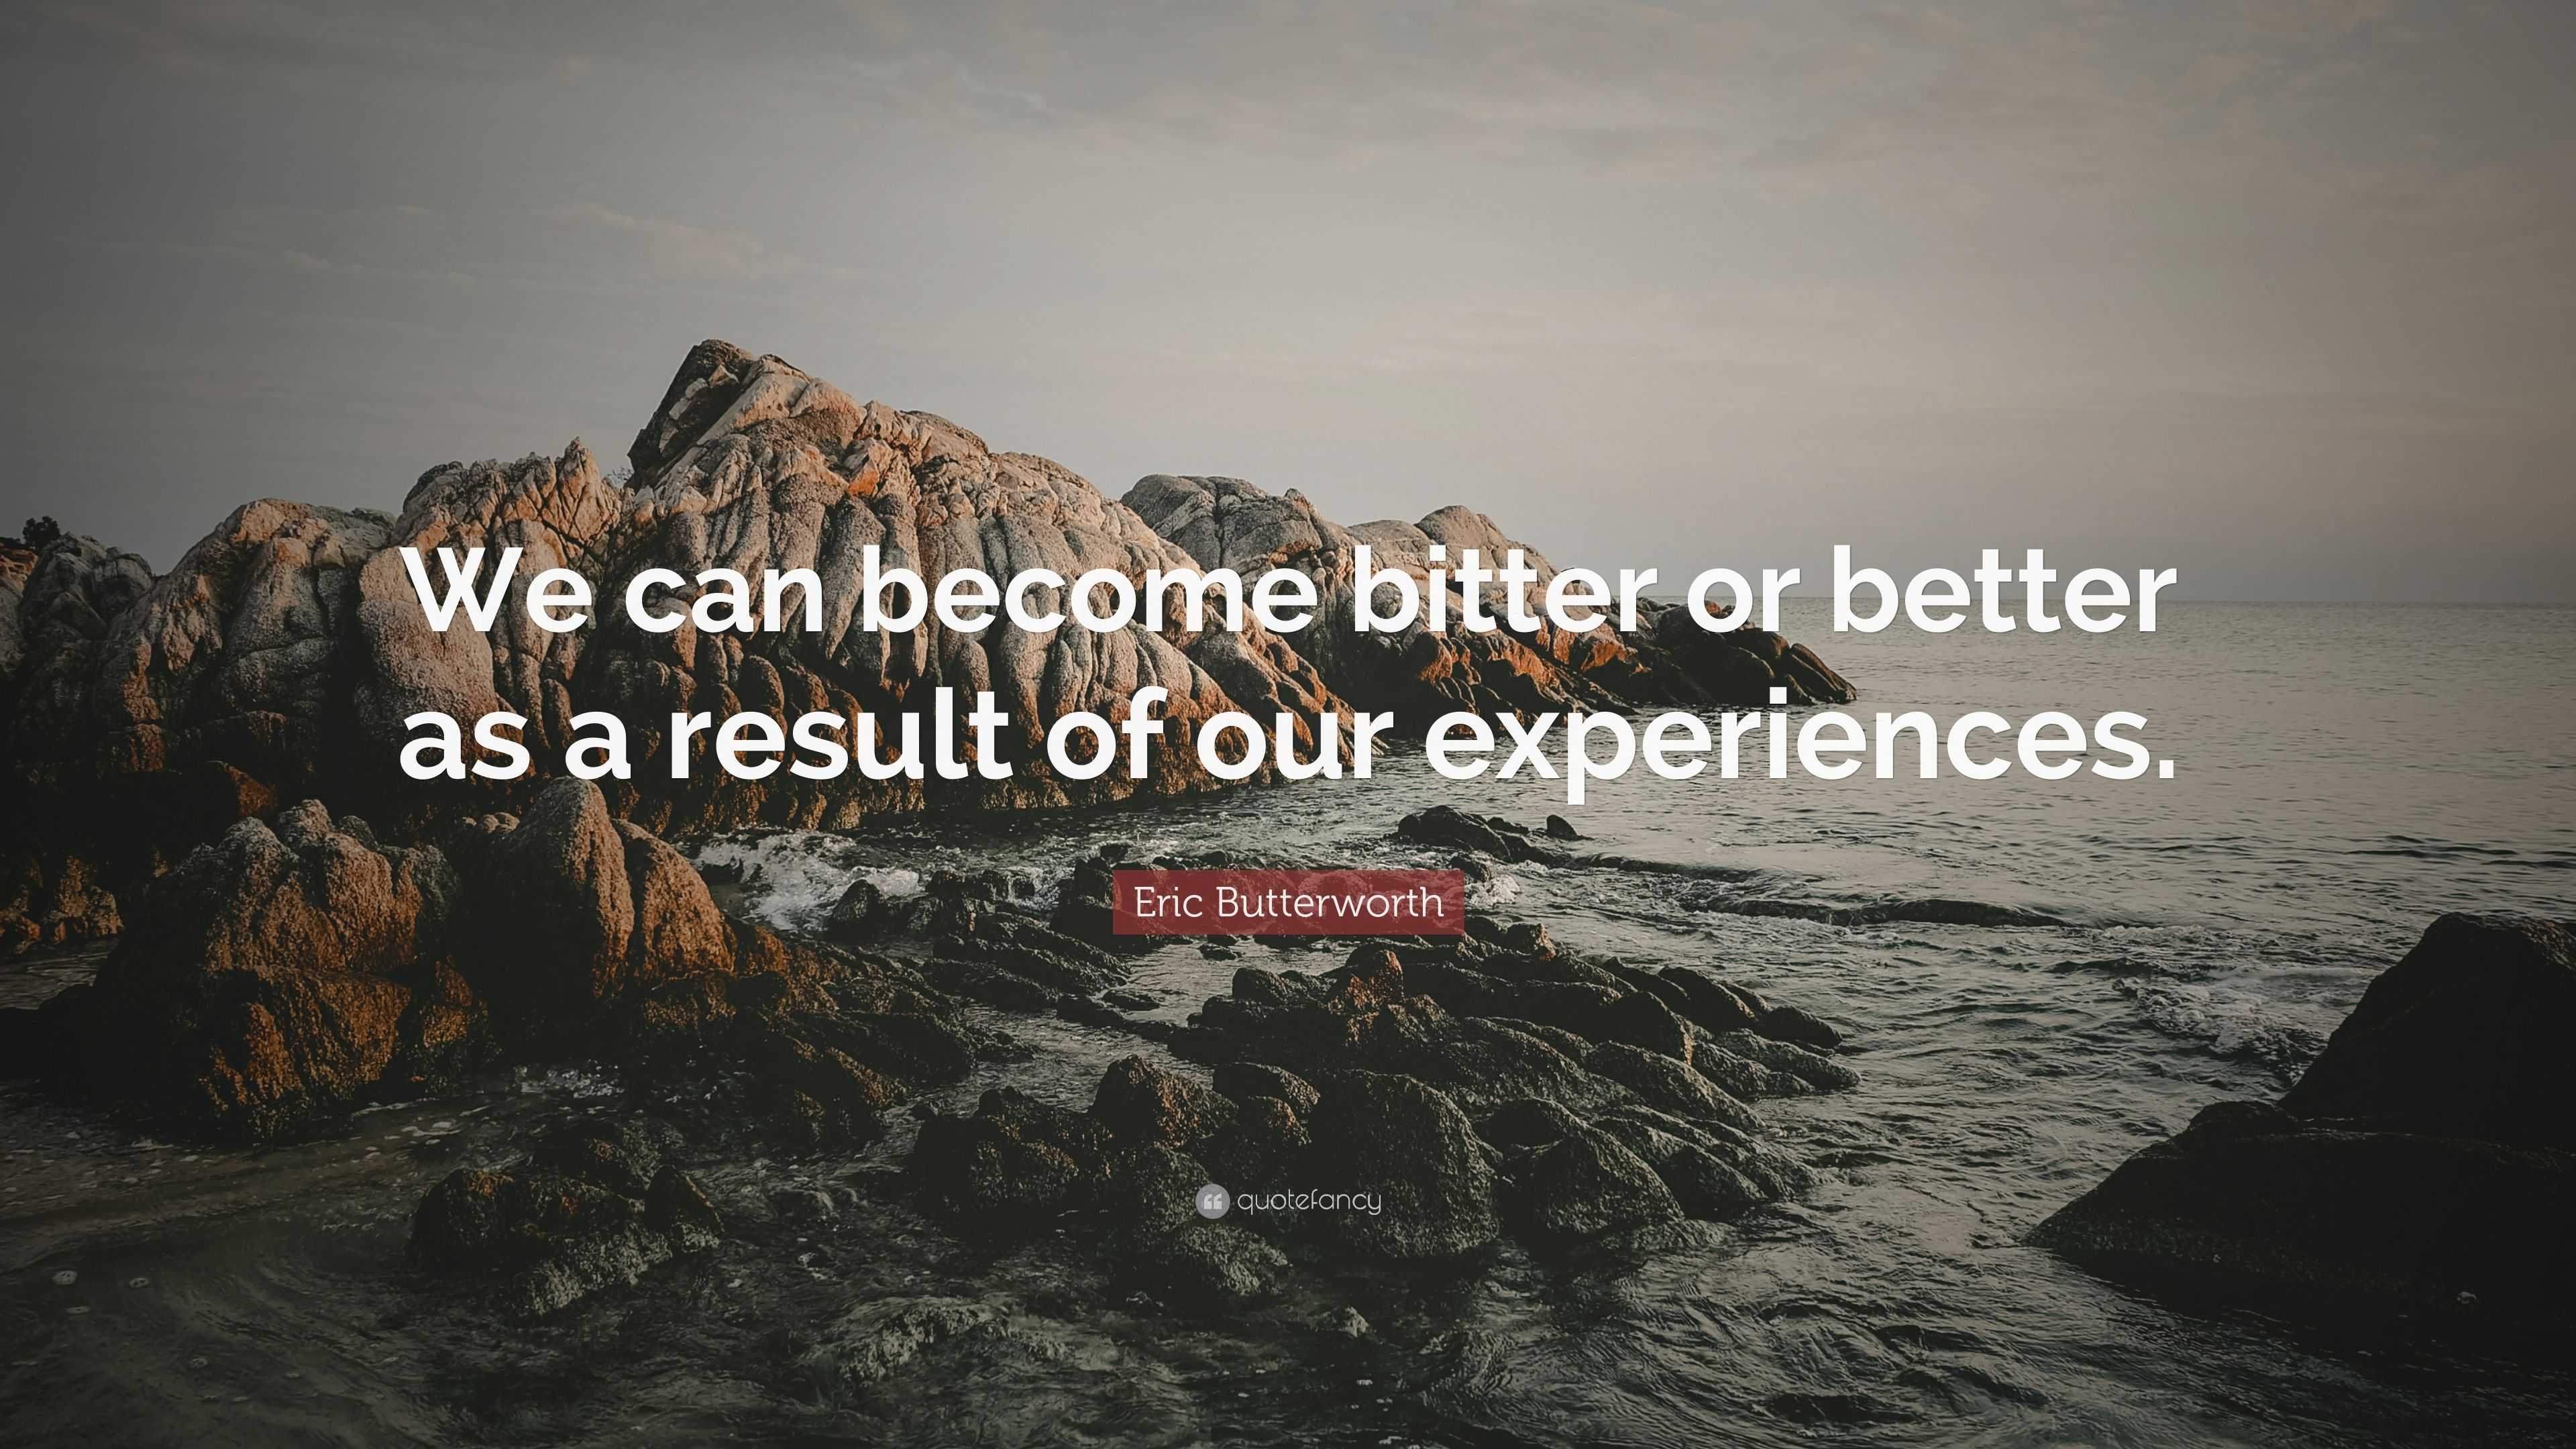 Eric Butterworth Quote: “We can become bitter or better as a result of